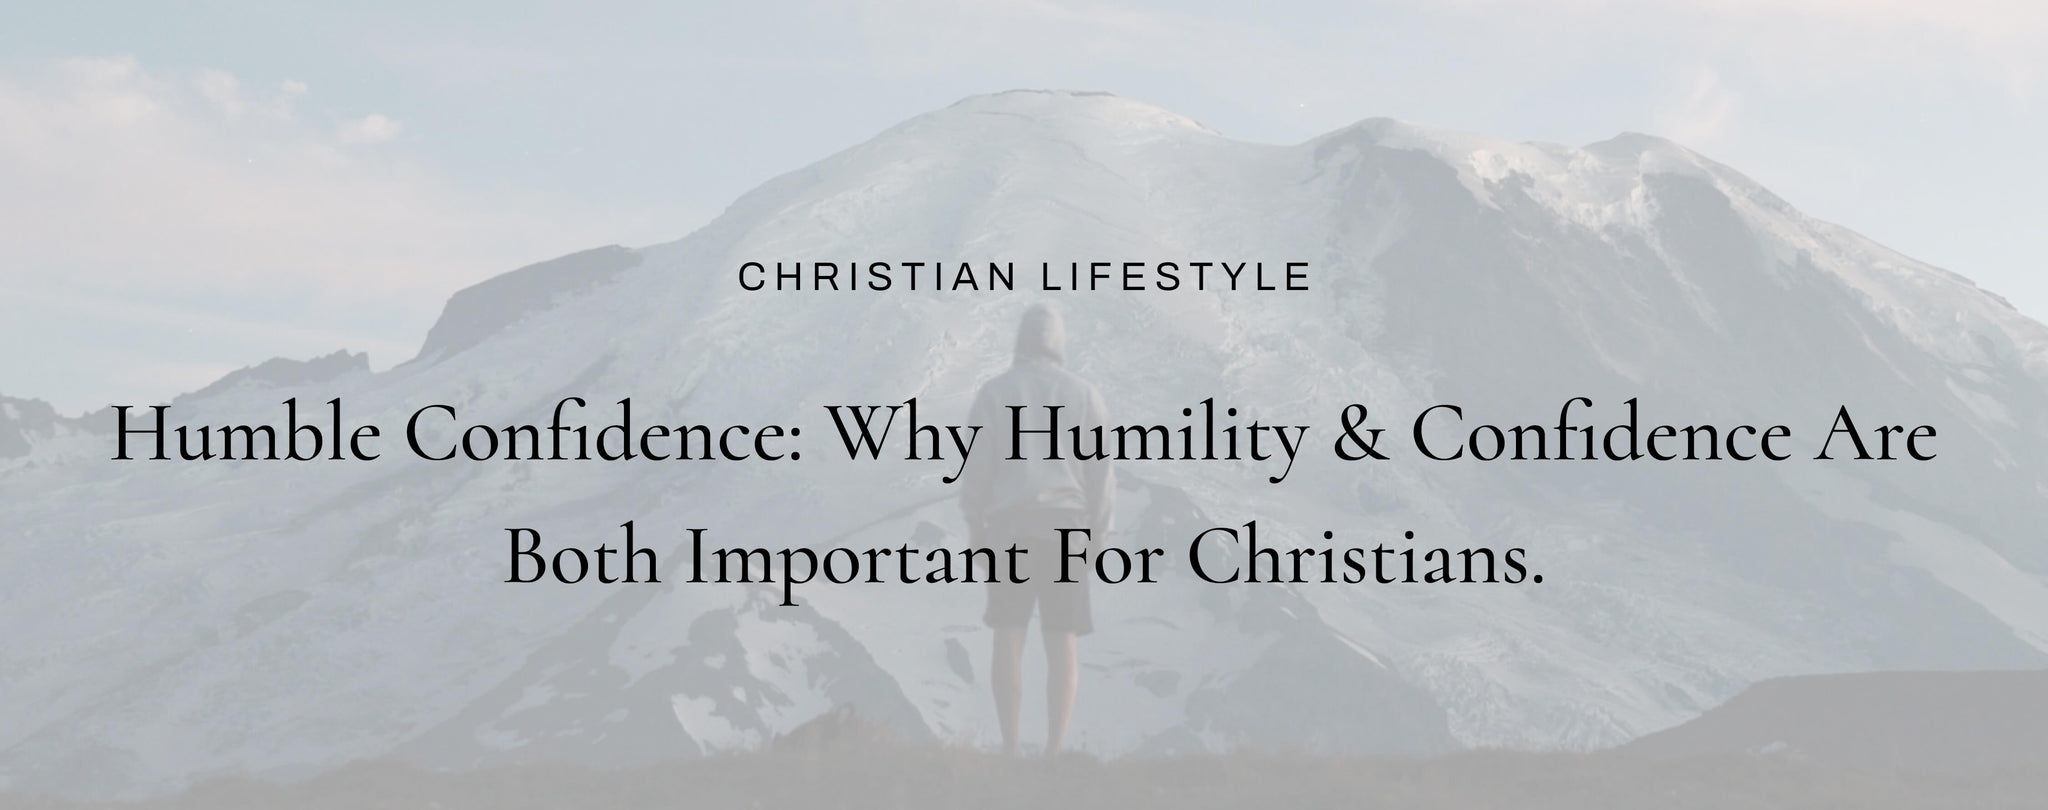 Humble Confidence: Why Humility and Confidence Are Both Important For Christians